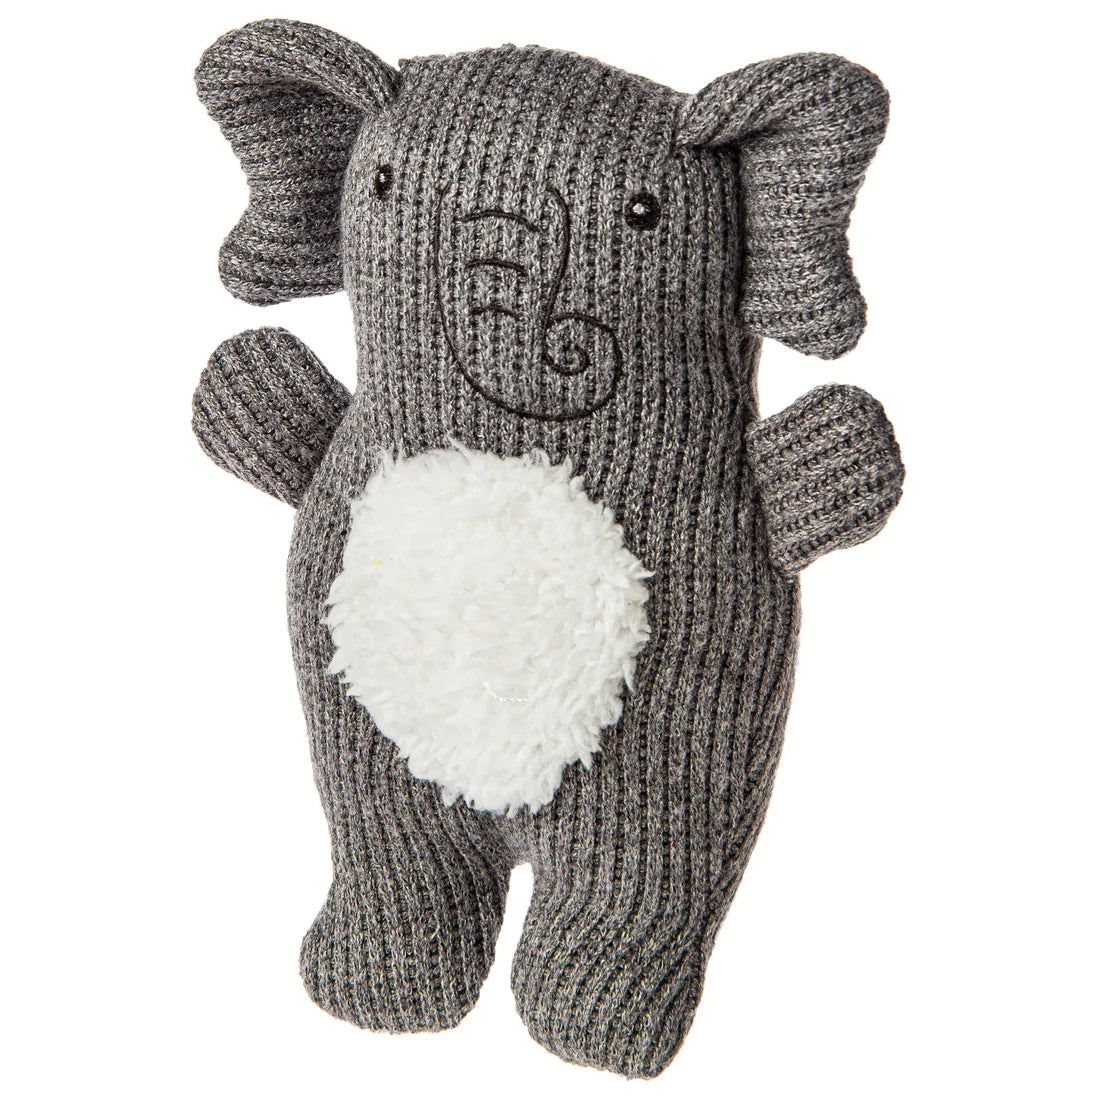 A Mary Meyer Grey Knitted Elephant Baby Rattle, Baby Shower Gifts.